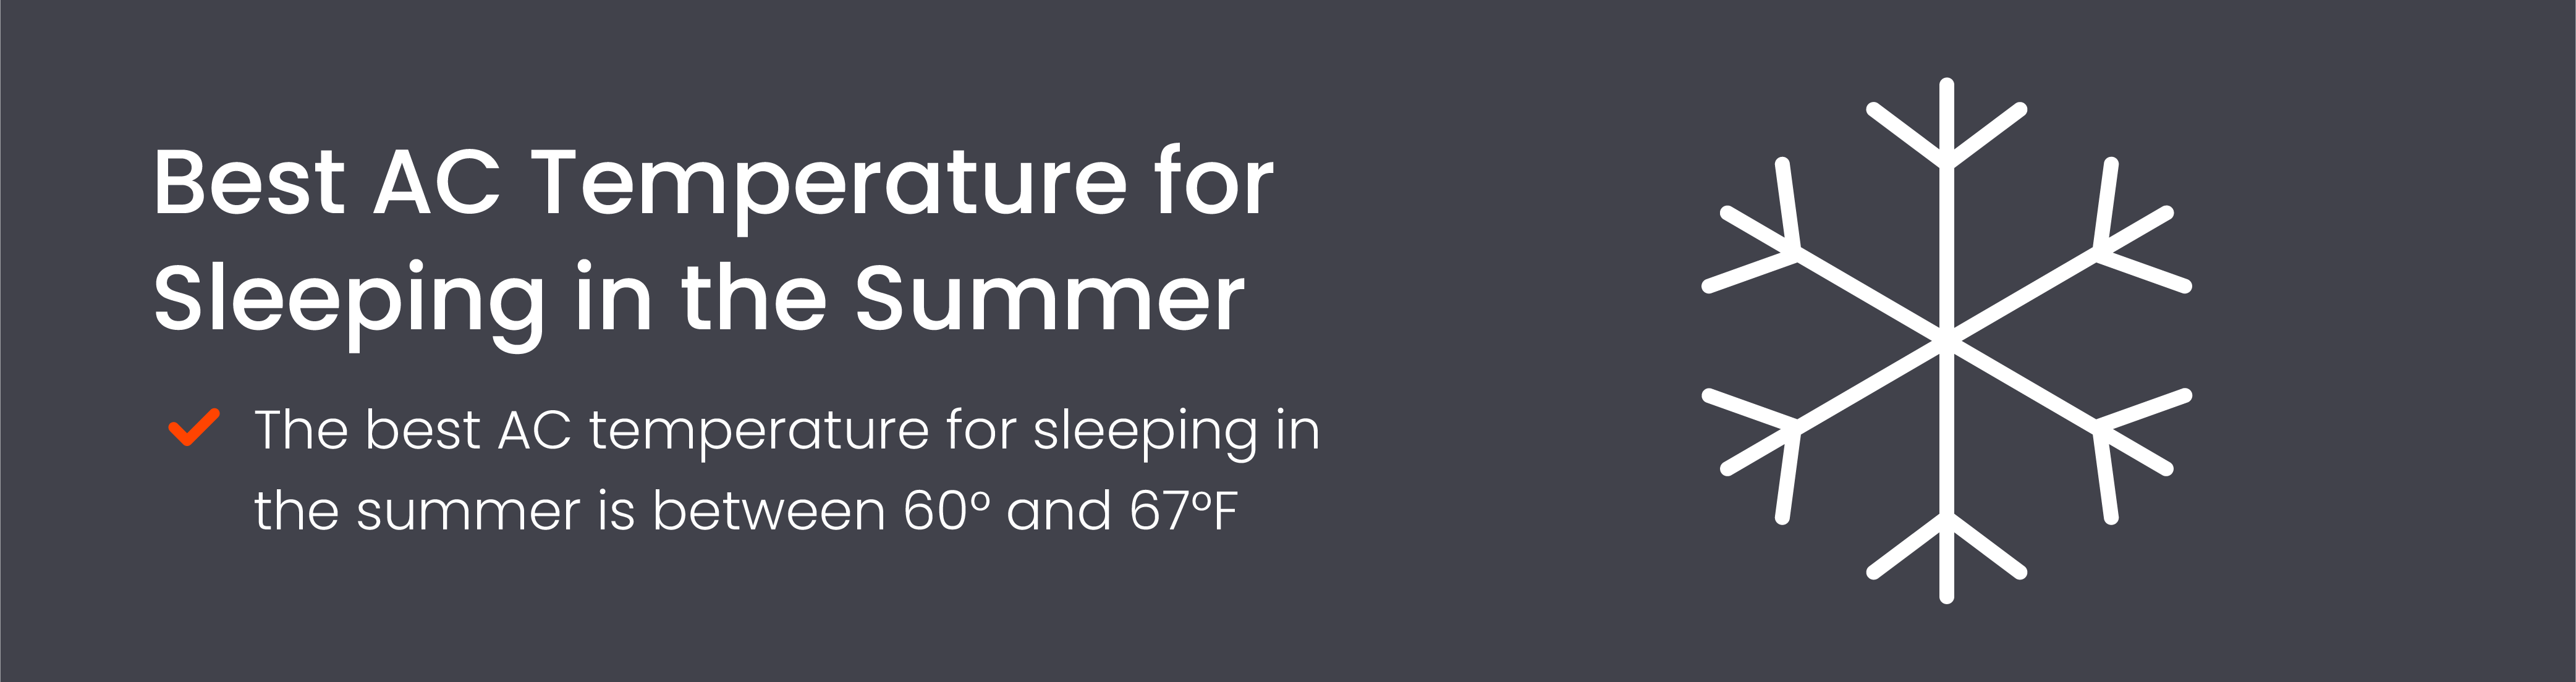 Best AC temperature for sleeping in the summer